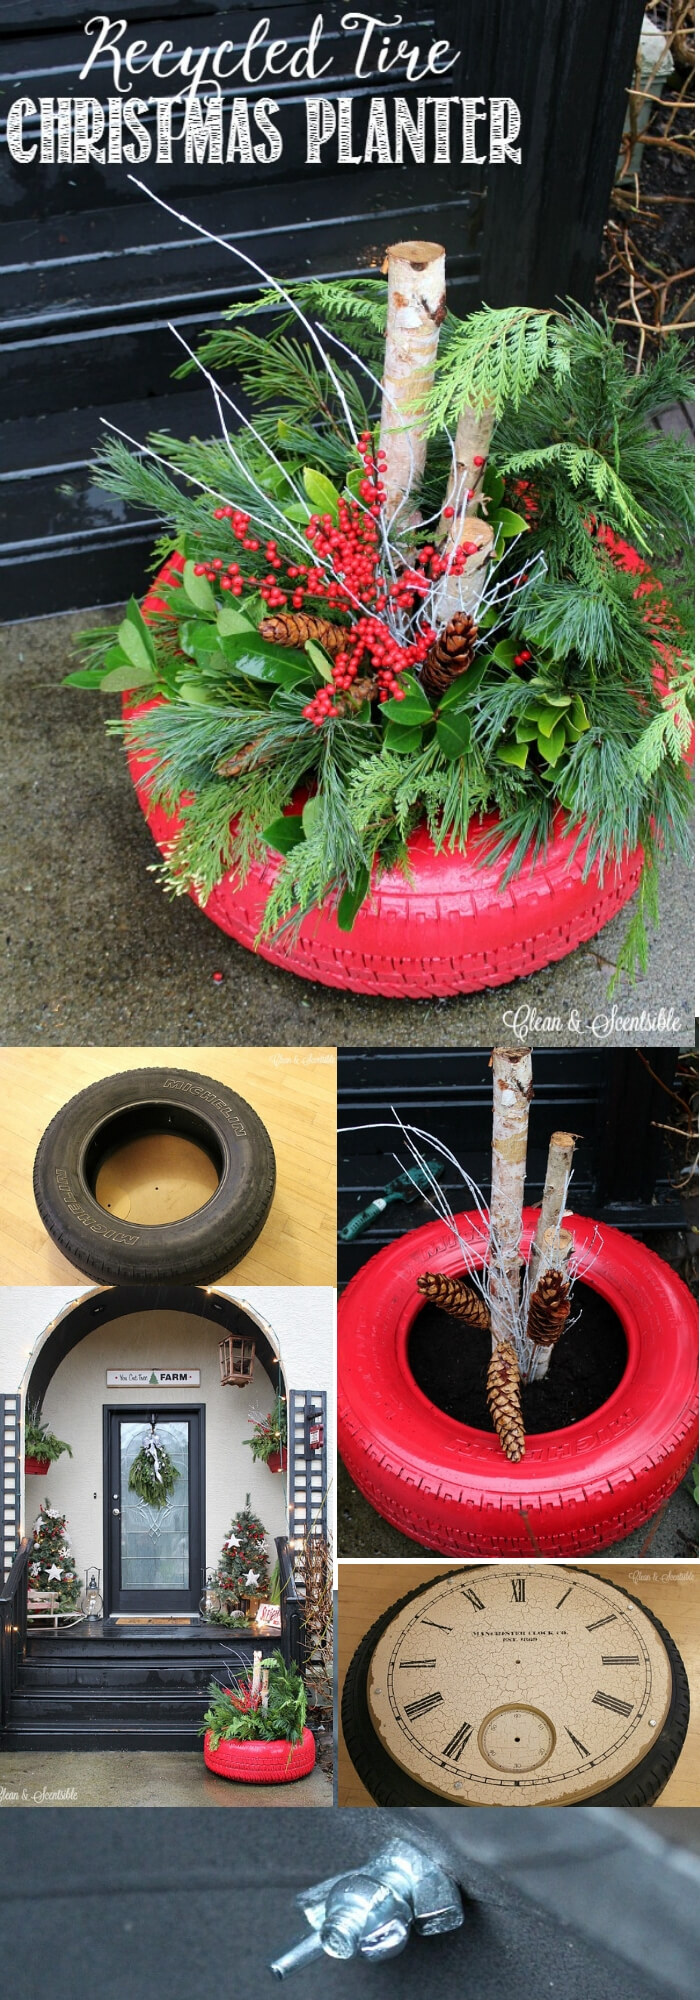 Recycled Tire Christmas Planter | Best Recycled Tire Christmas Decoration Ideas | FarmFoodFamily.com